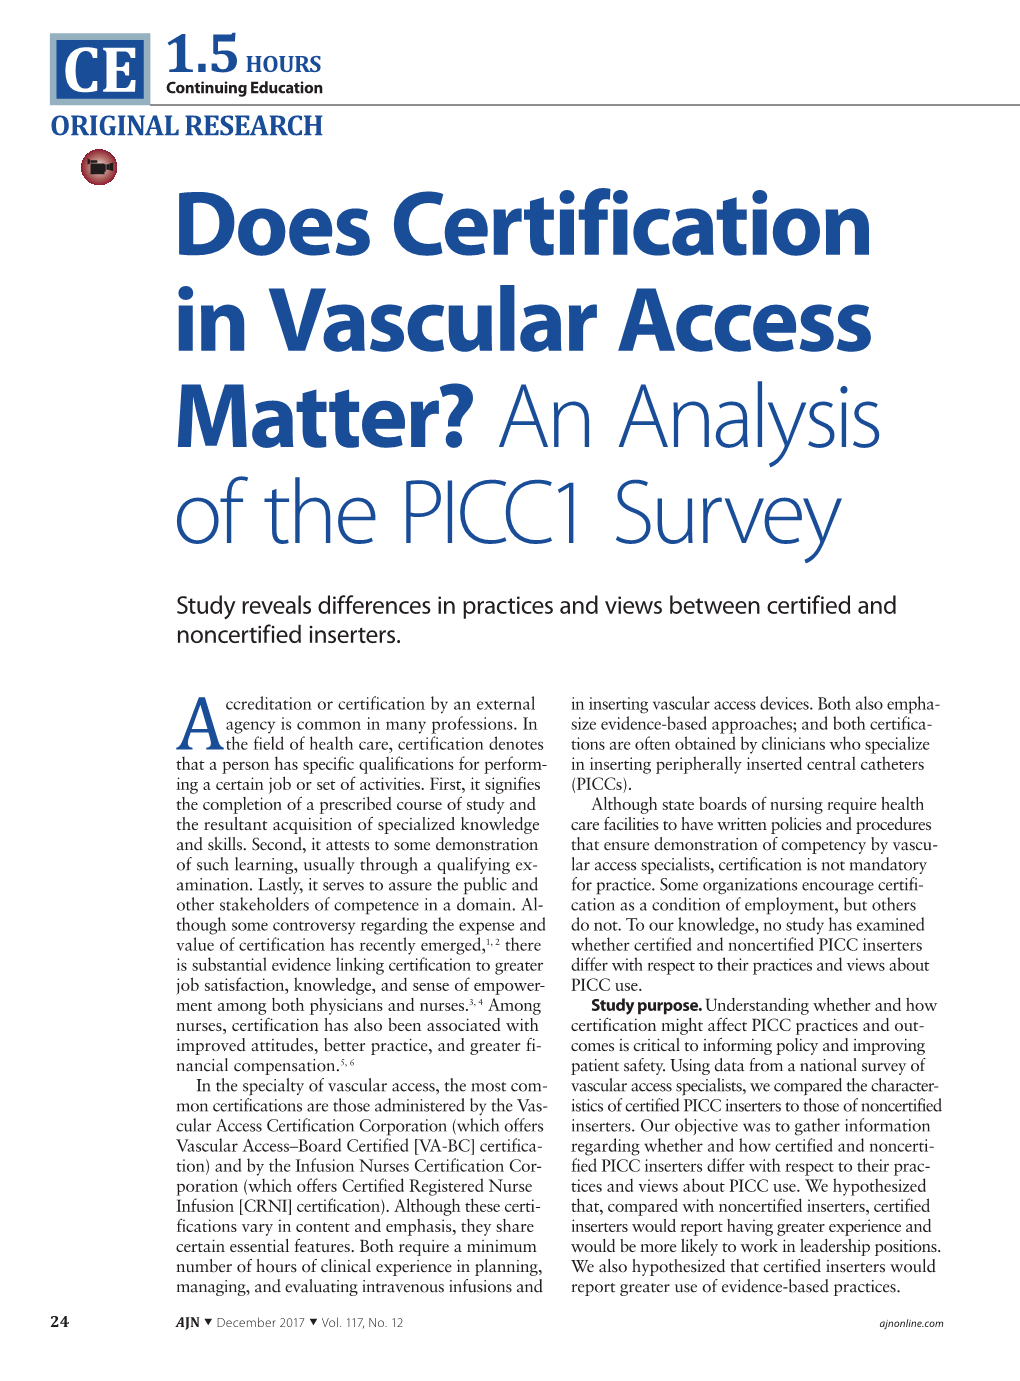 Does Certification in Vascular Access Matter? an Analysis of the PICC1 Survey